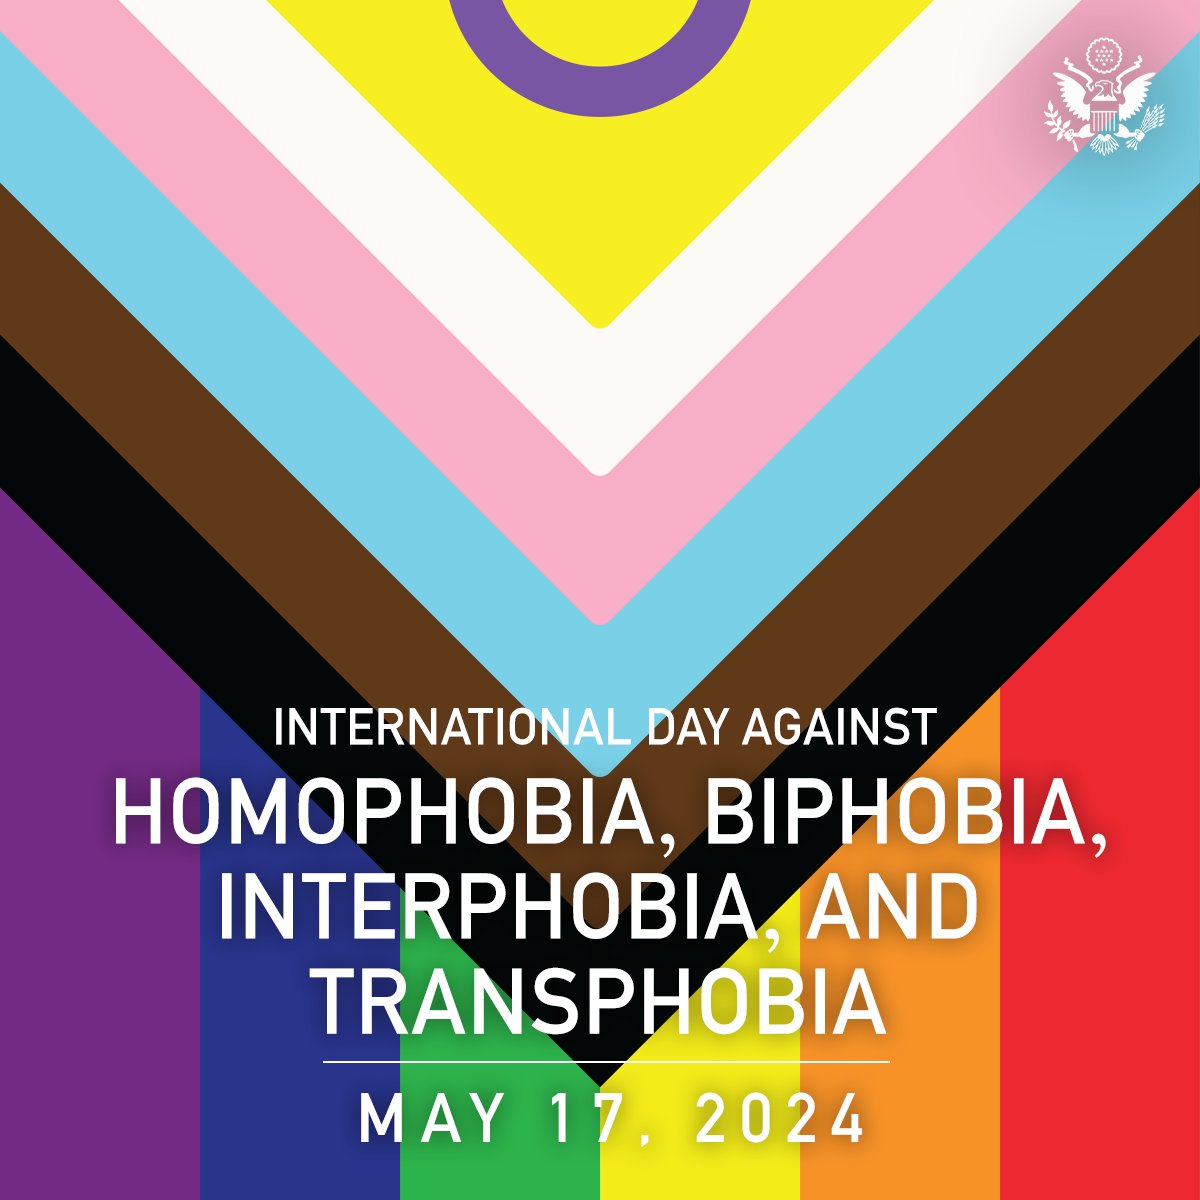 LGBTQI+ persons deserve recognition of their universal human rights and human dignity. On #IDAHOBIT and every day, the United States stands with LGBTQI+ persons around the world.